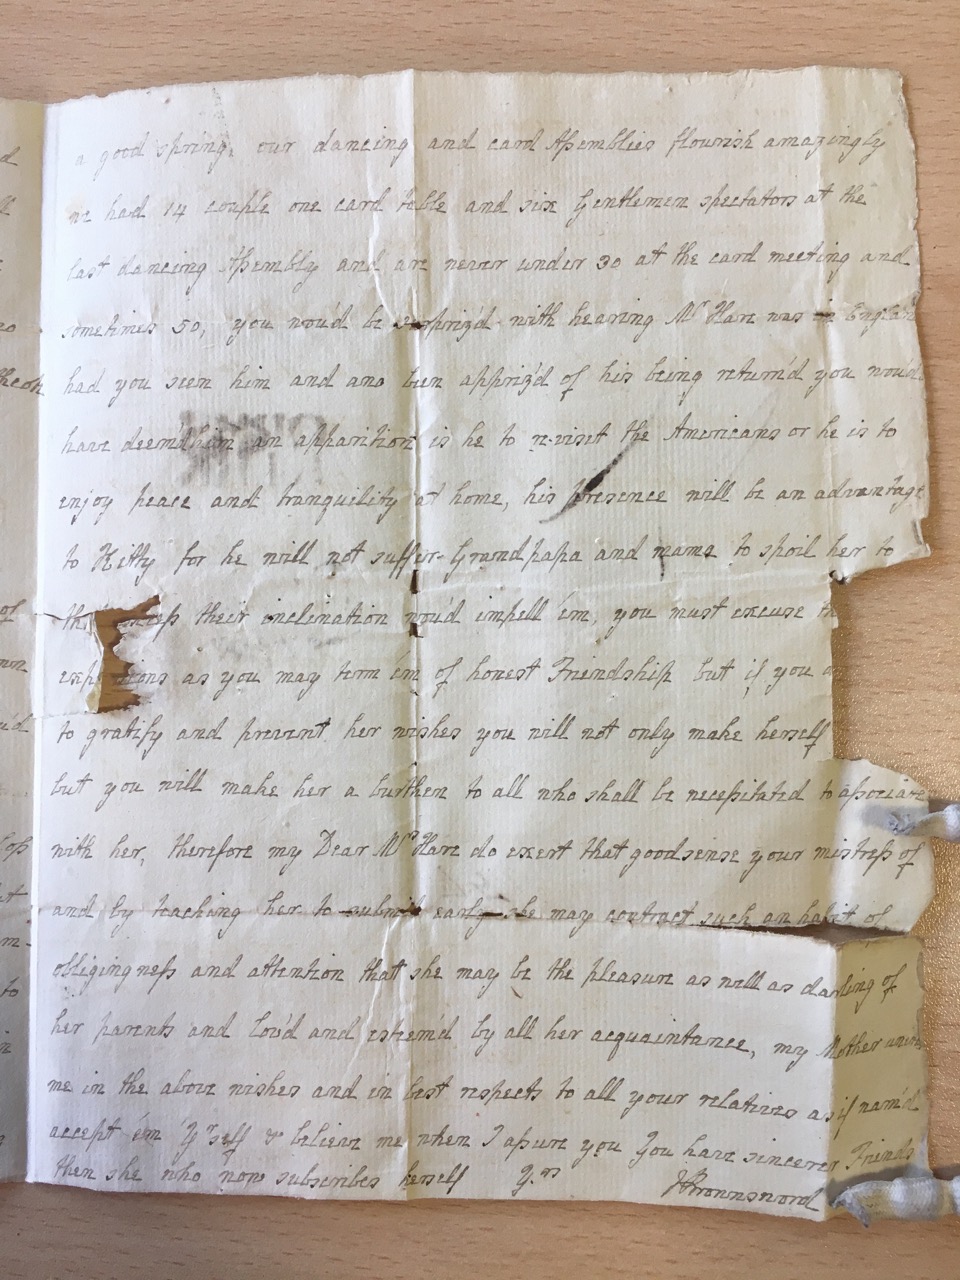 Image #3 of letter: J[enny] Brownsword to Ann Hare, 19 February 1775